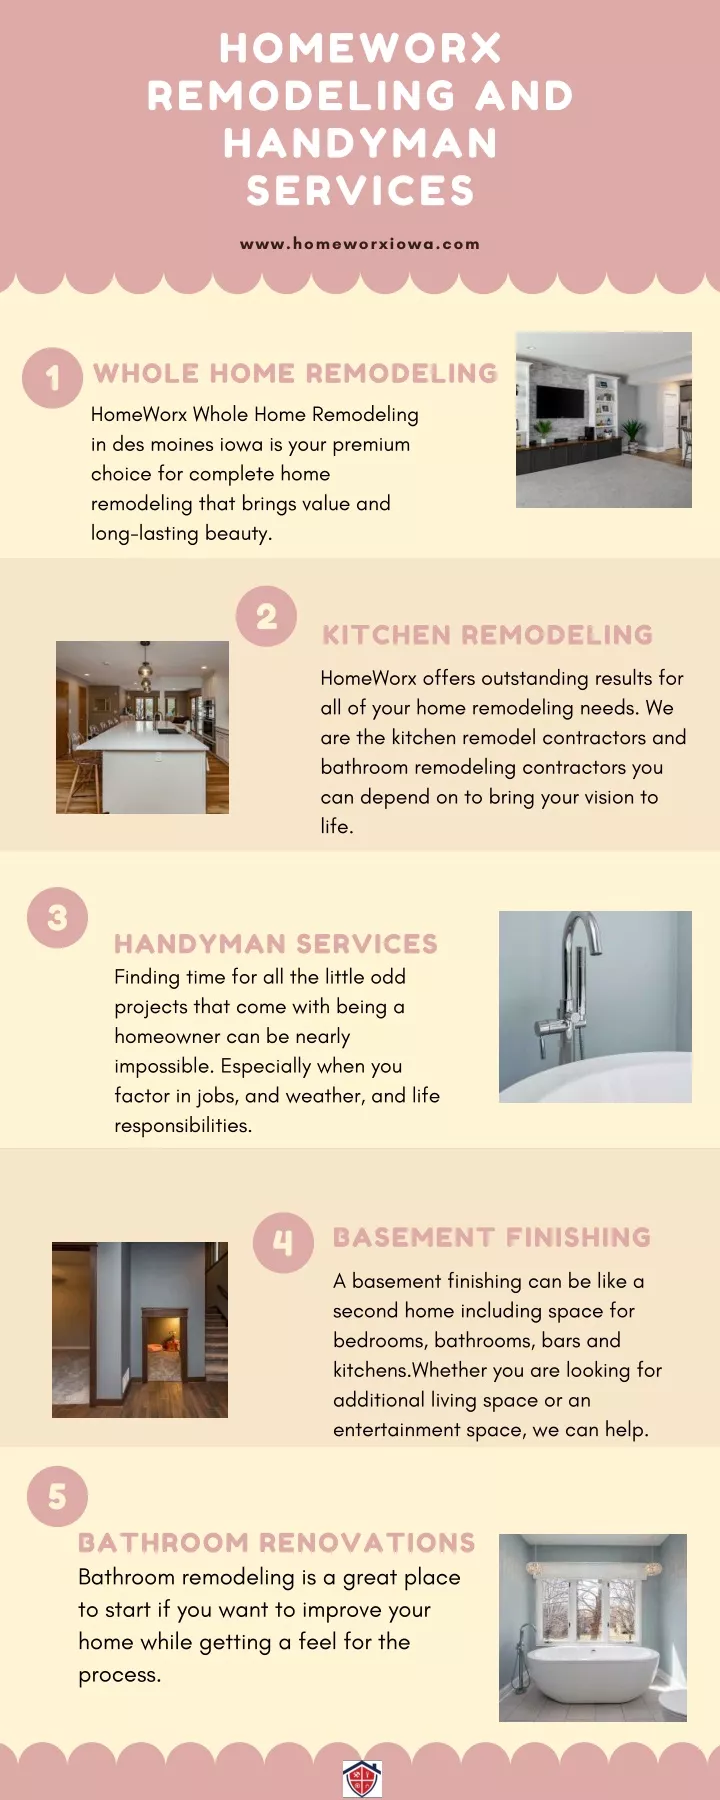 homeworx remodeling and handyman services